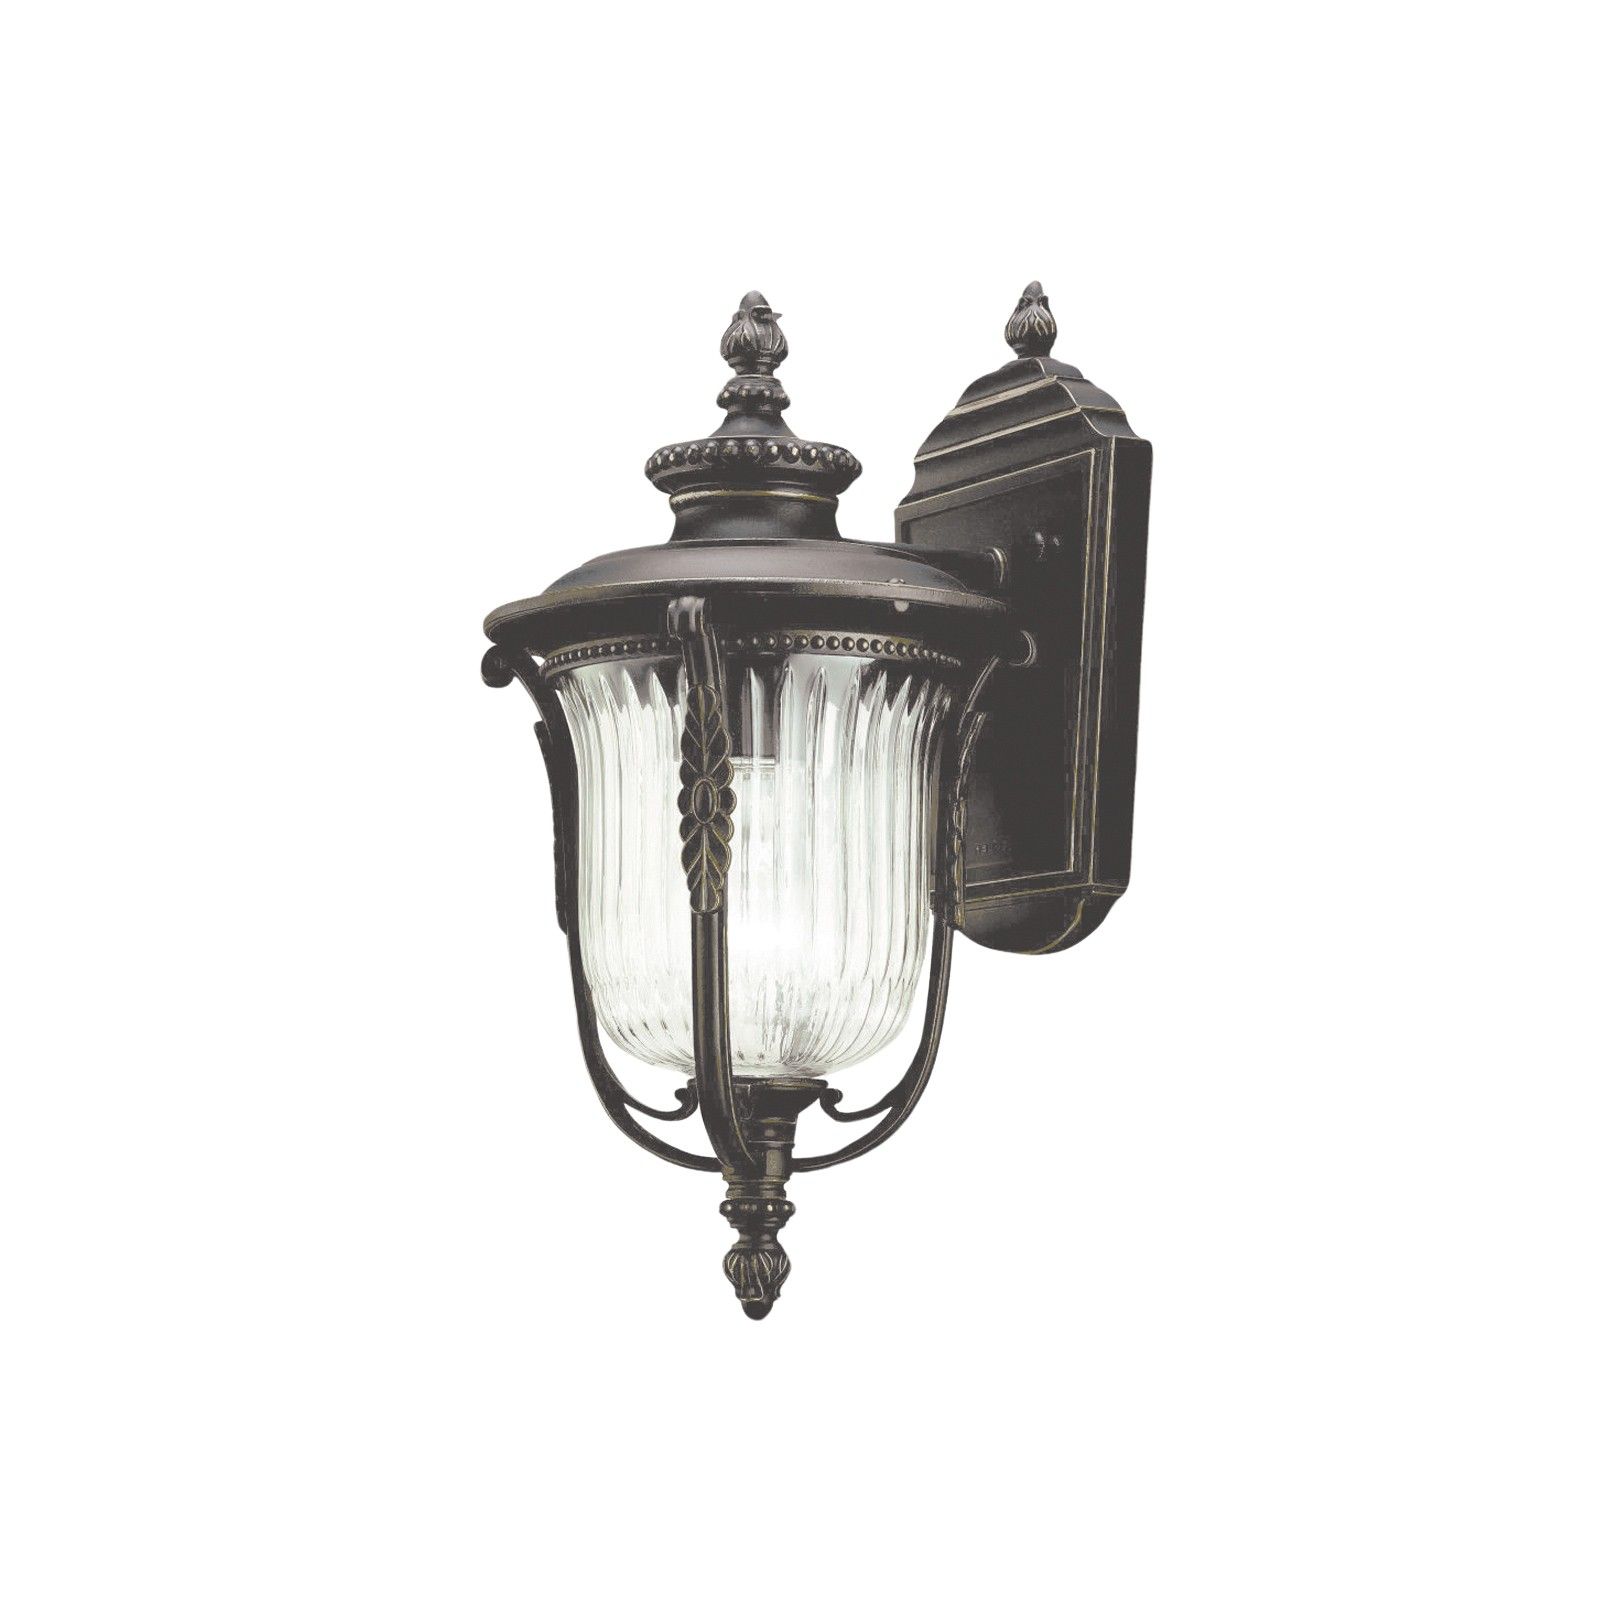 Laverne small wall light